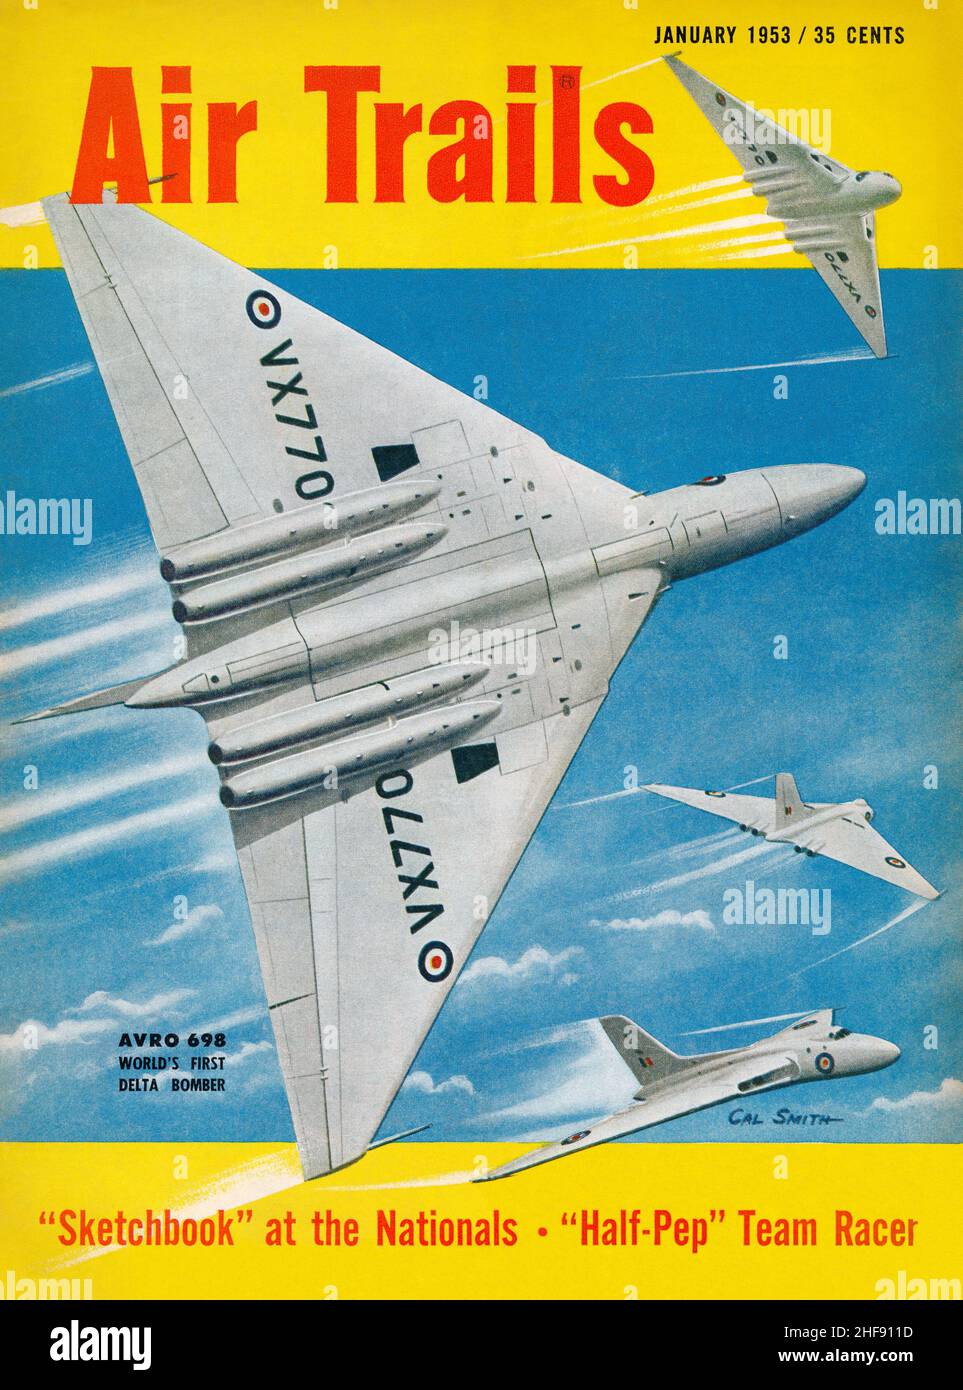 Vintage front cover of Air Trails magazine for January 1953, with an illustration of Afro Vulcan bombers by S. Calhoun Smith. Stock Photo